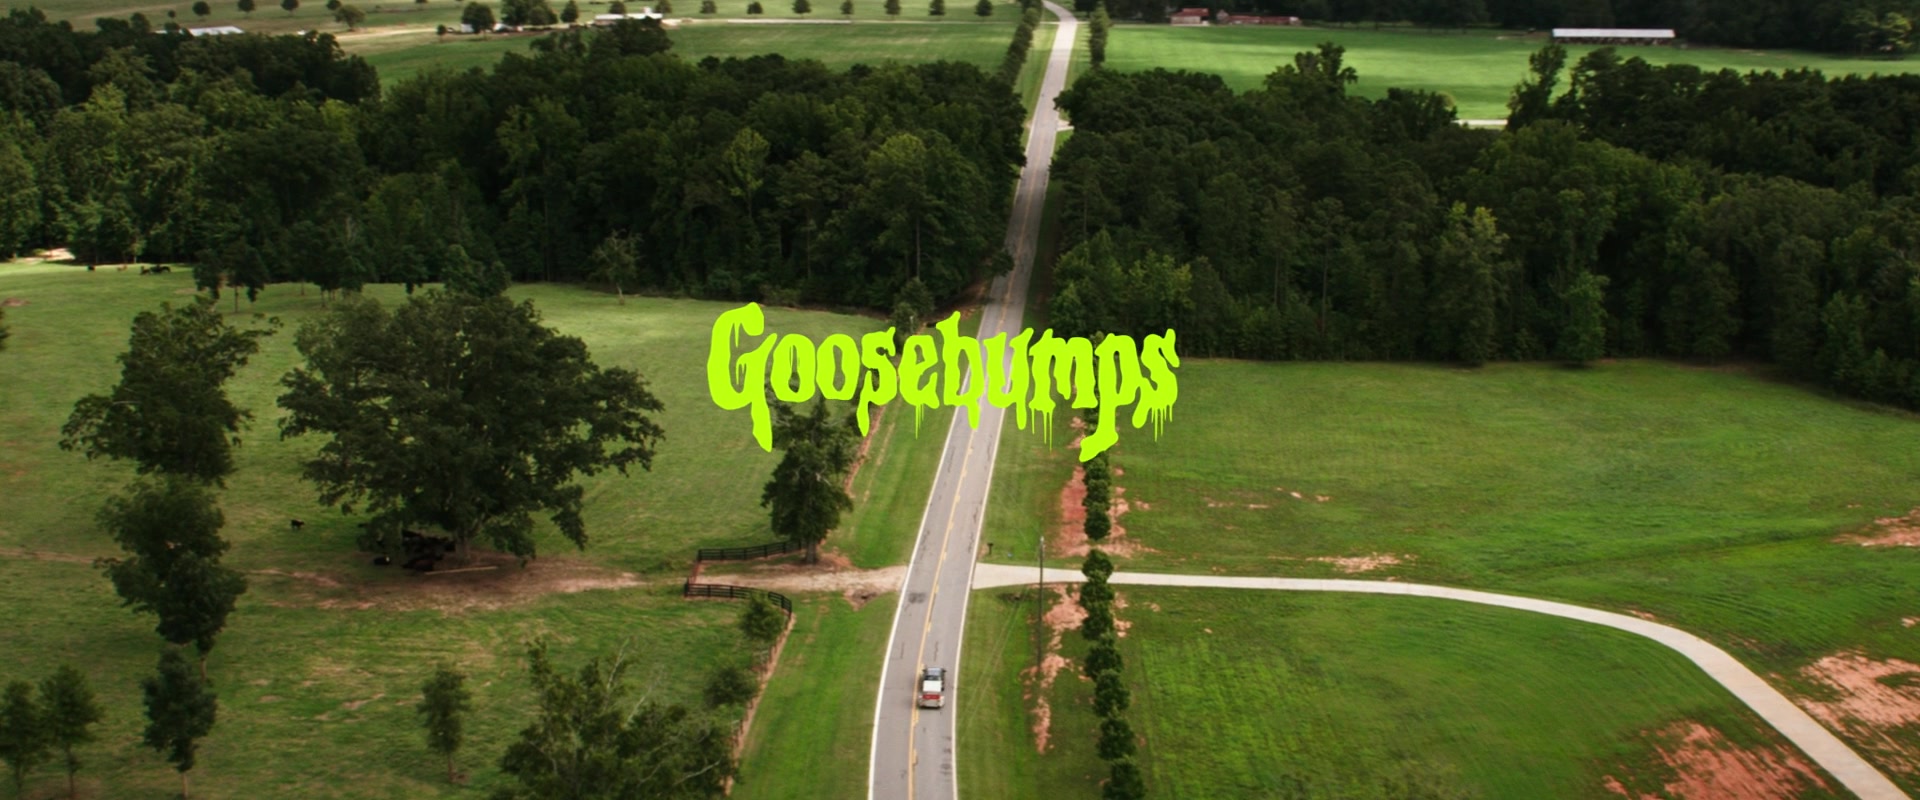 Goosebumps | Film and Television Wikia | FANDOM powered by ...